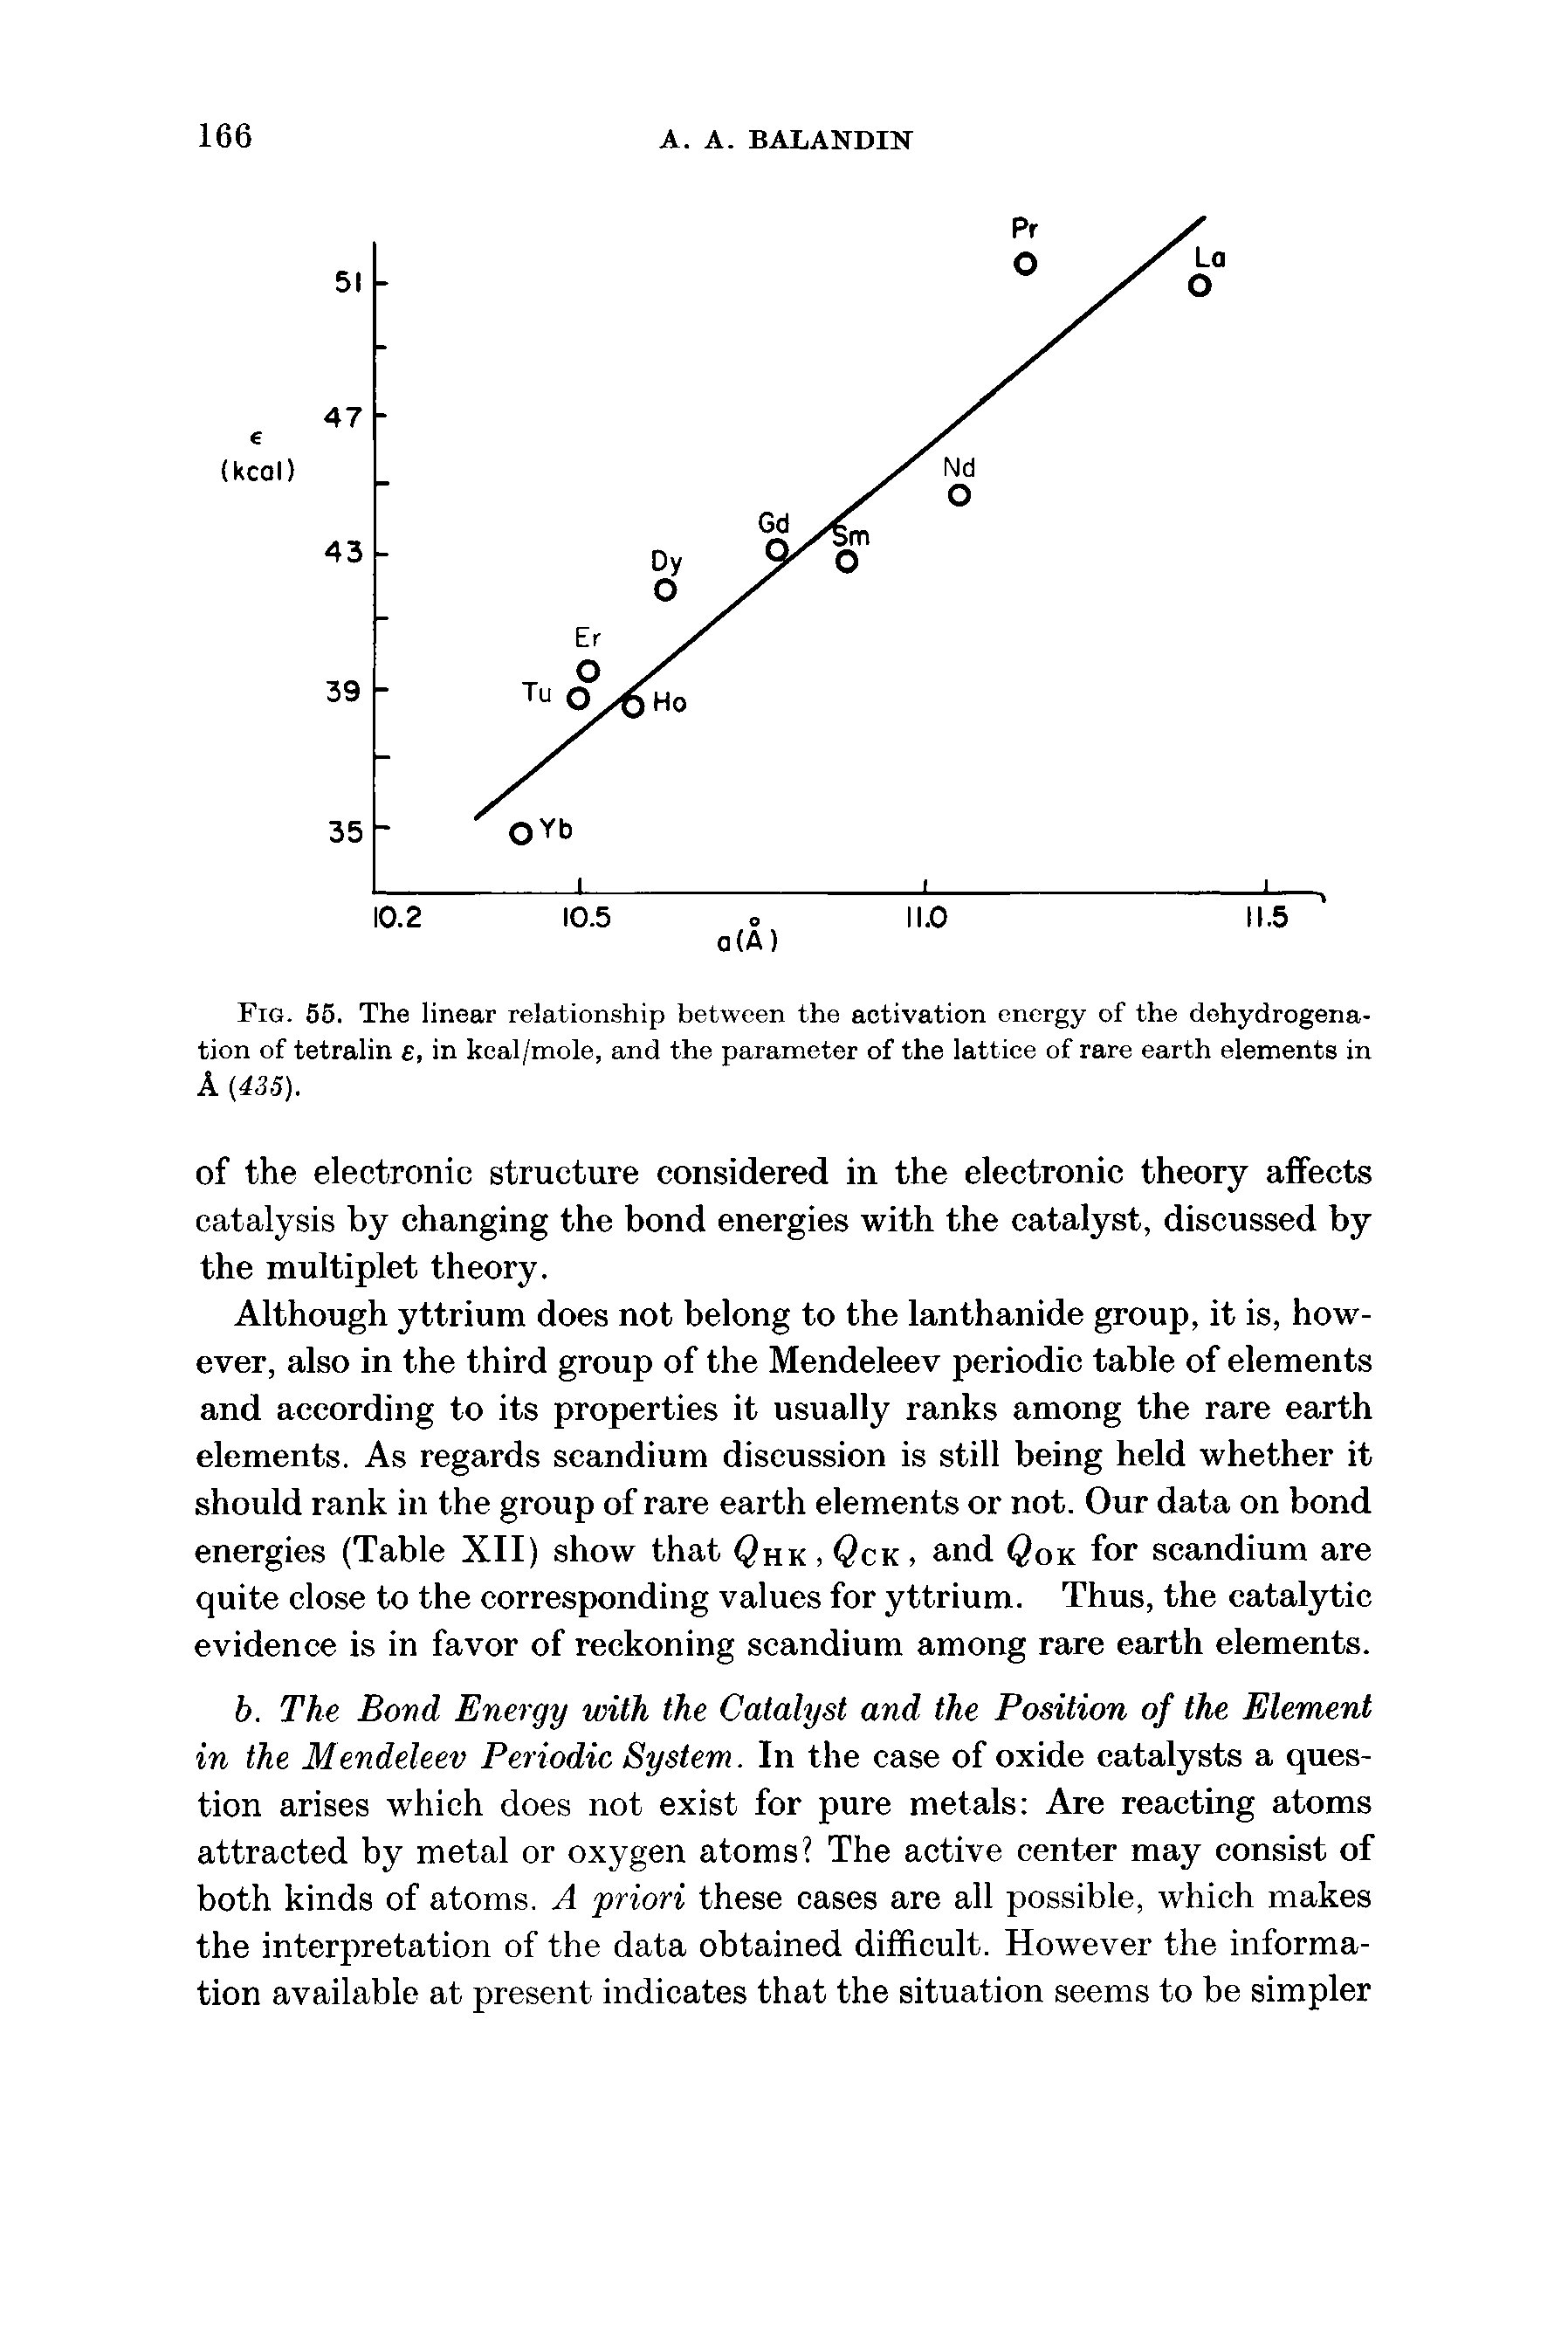 Fig. 55. The linear relationship between the activation energy of the dehydrogenation of tetralin e, in kcal/mole, and the parameter of the lattice of rare earth elements in...